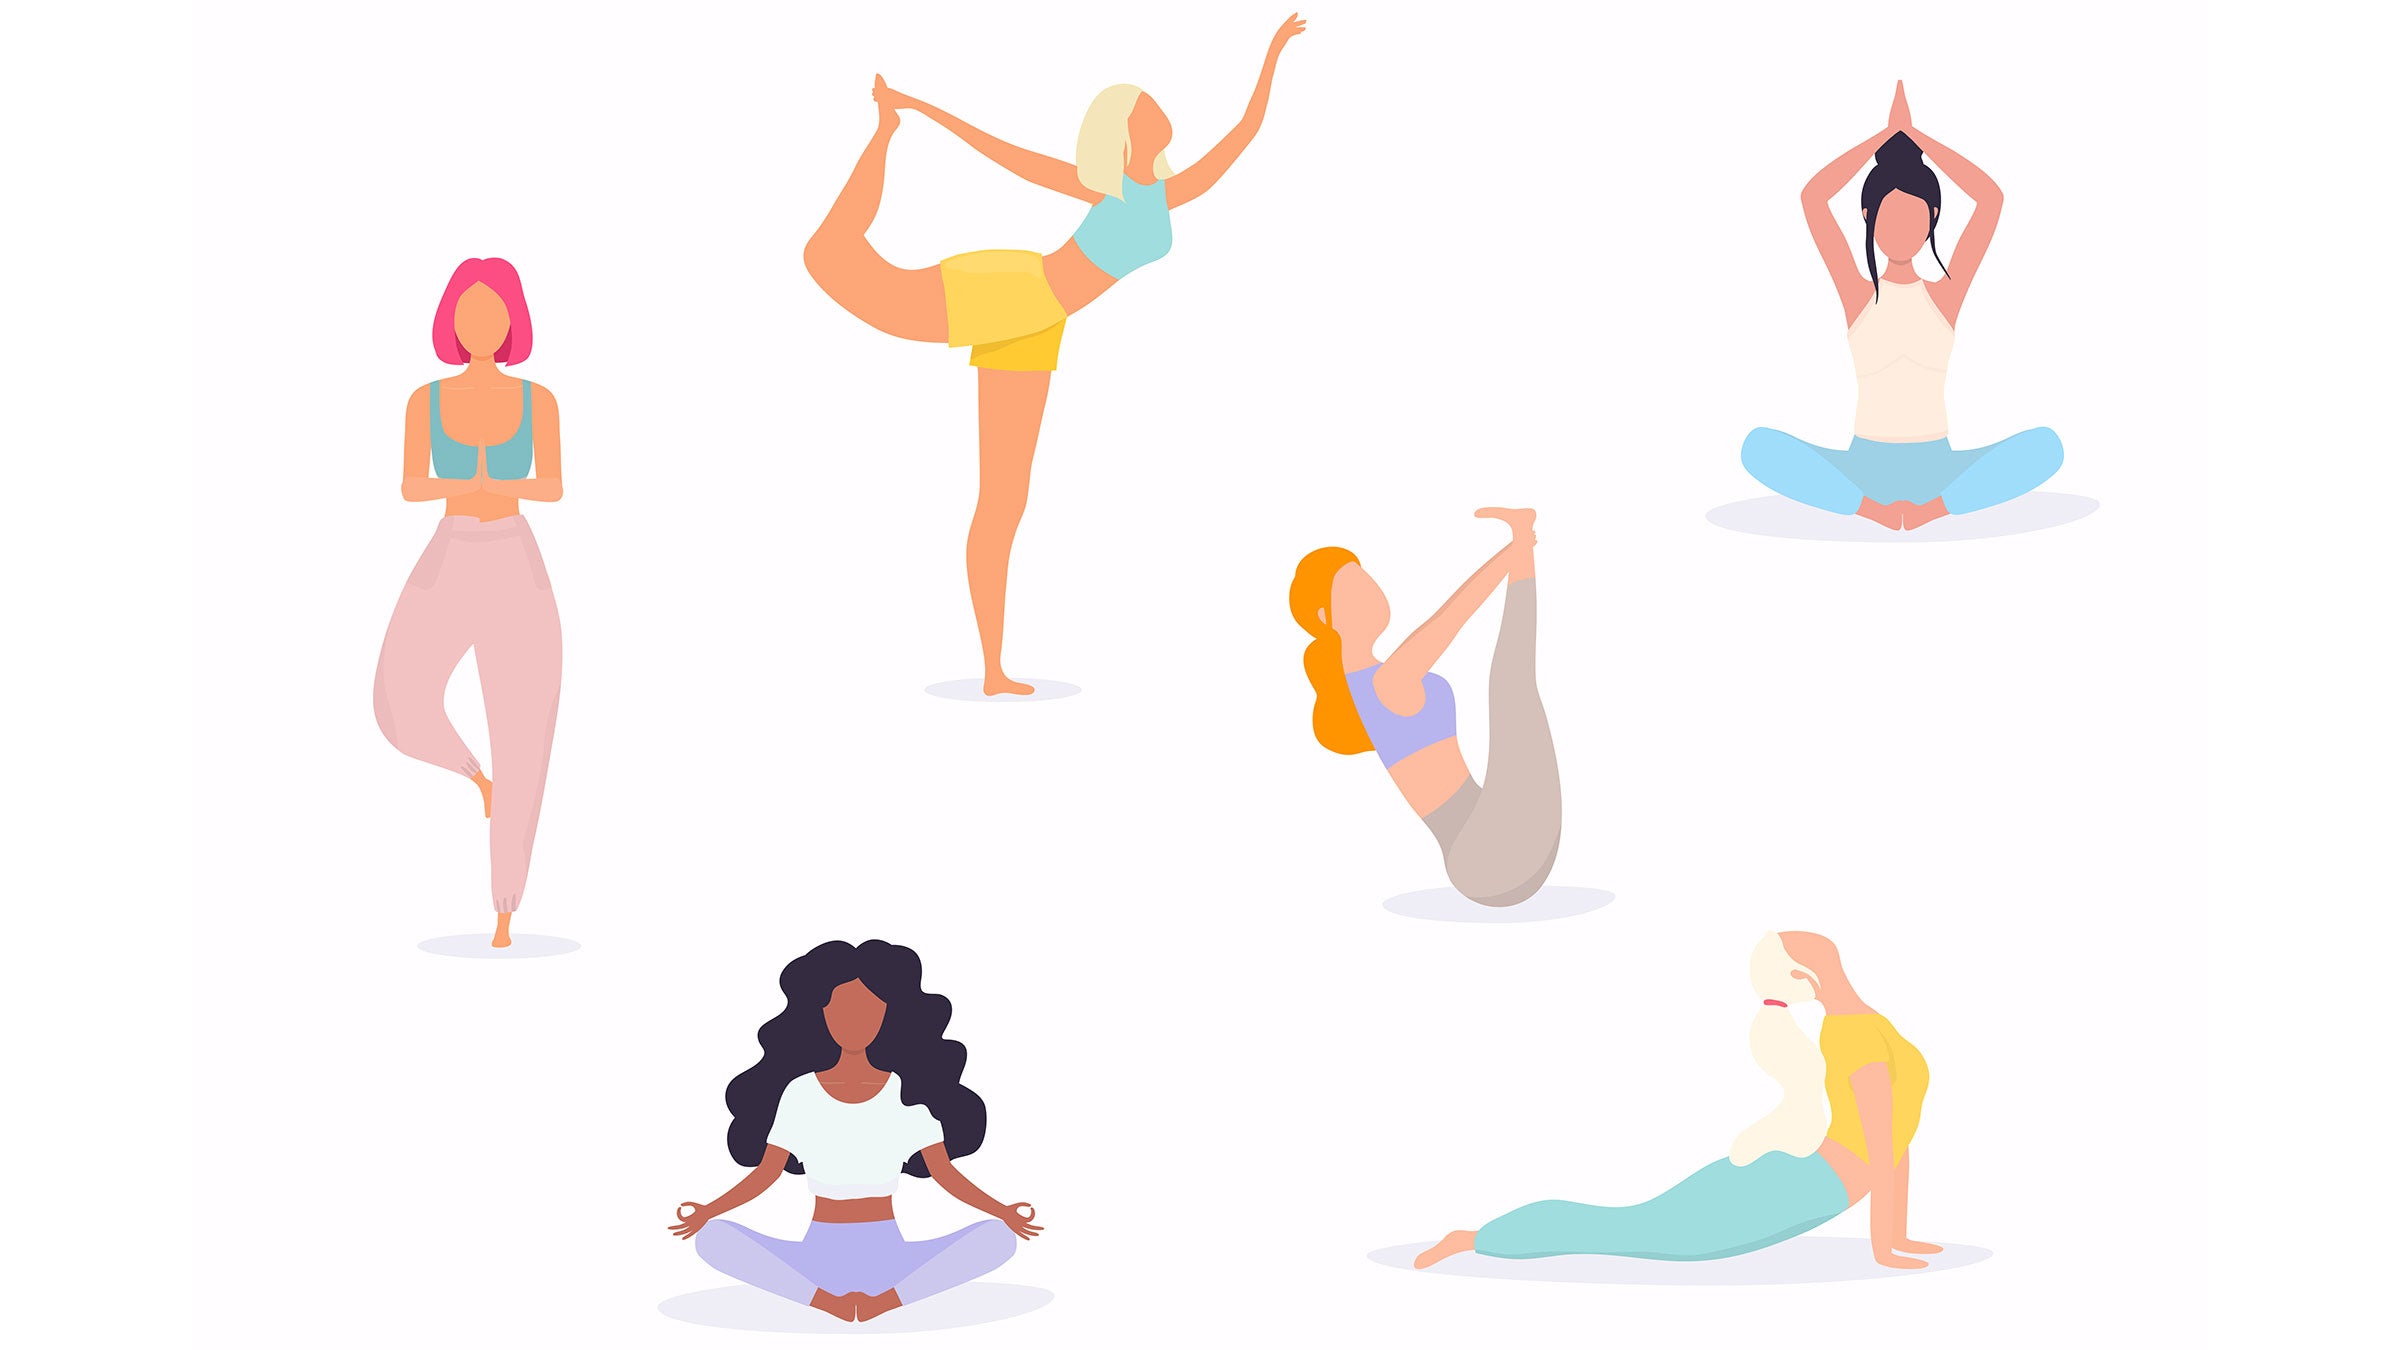 Yoga Poses A Z: Search Yoga Journal's Extensive Pose Library